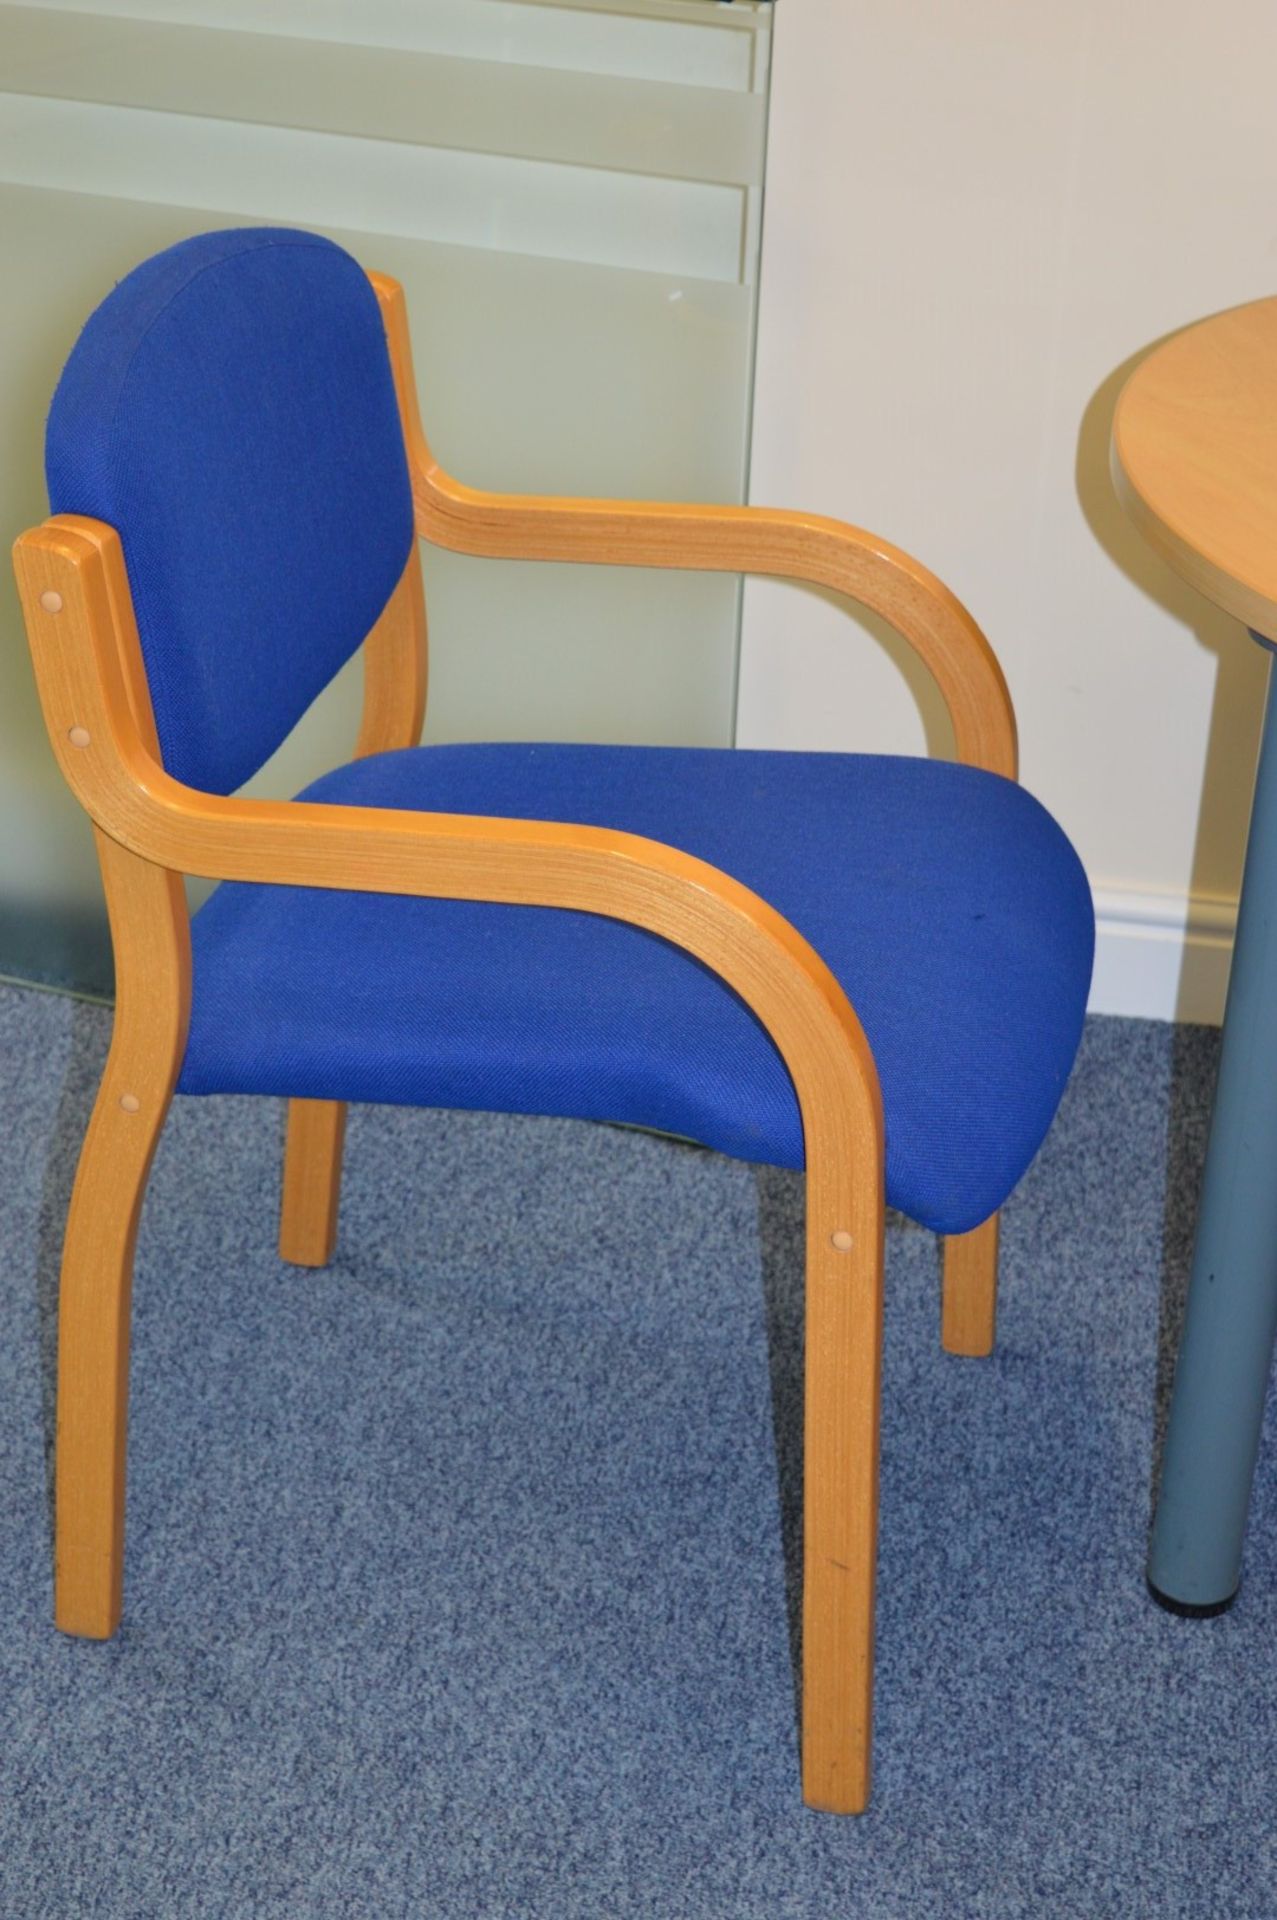 1 x Meeting Taable With Beech Finish and Two Curved Wood Meeting Chairs - H73 x W100 x D100 cms - - Image 2 of 4